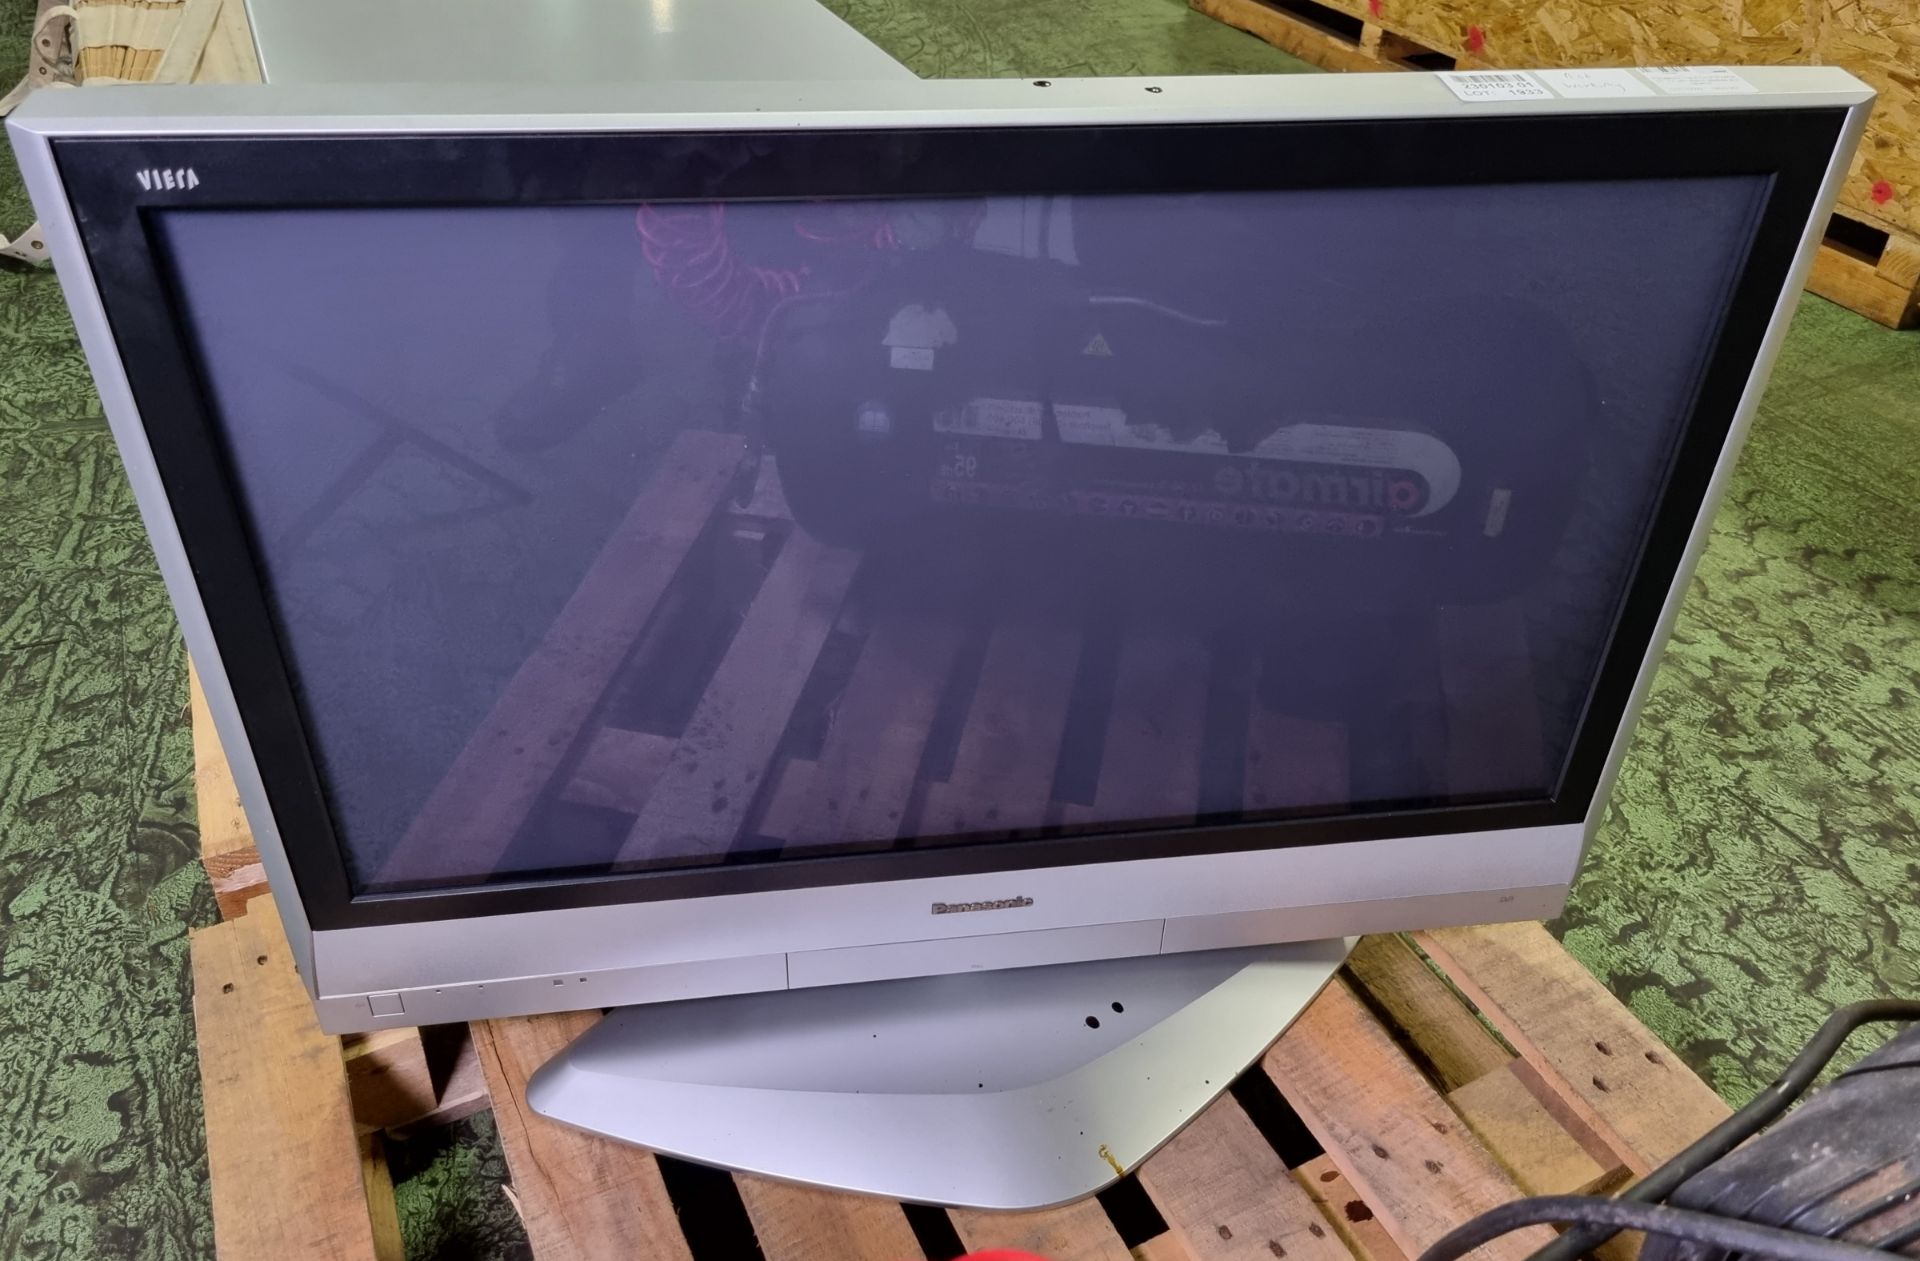 Panasonic Viera TH-37PX60B 37" TV with stand (spares and repairs)